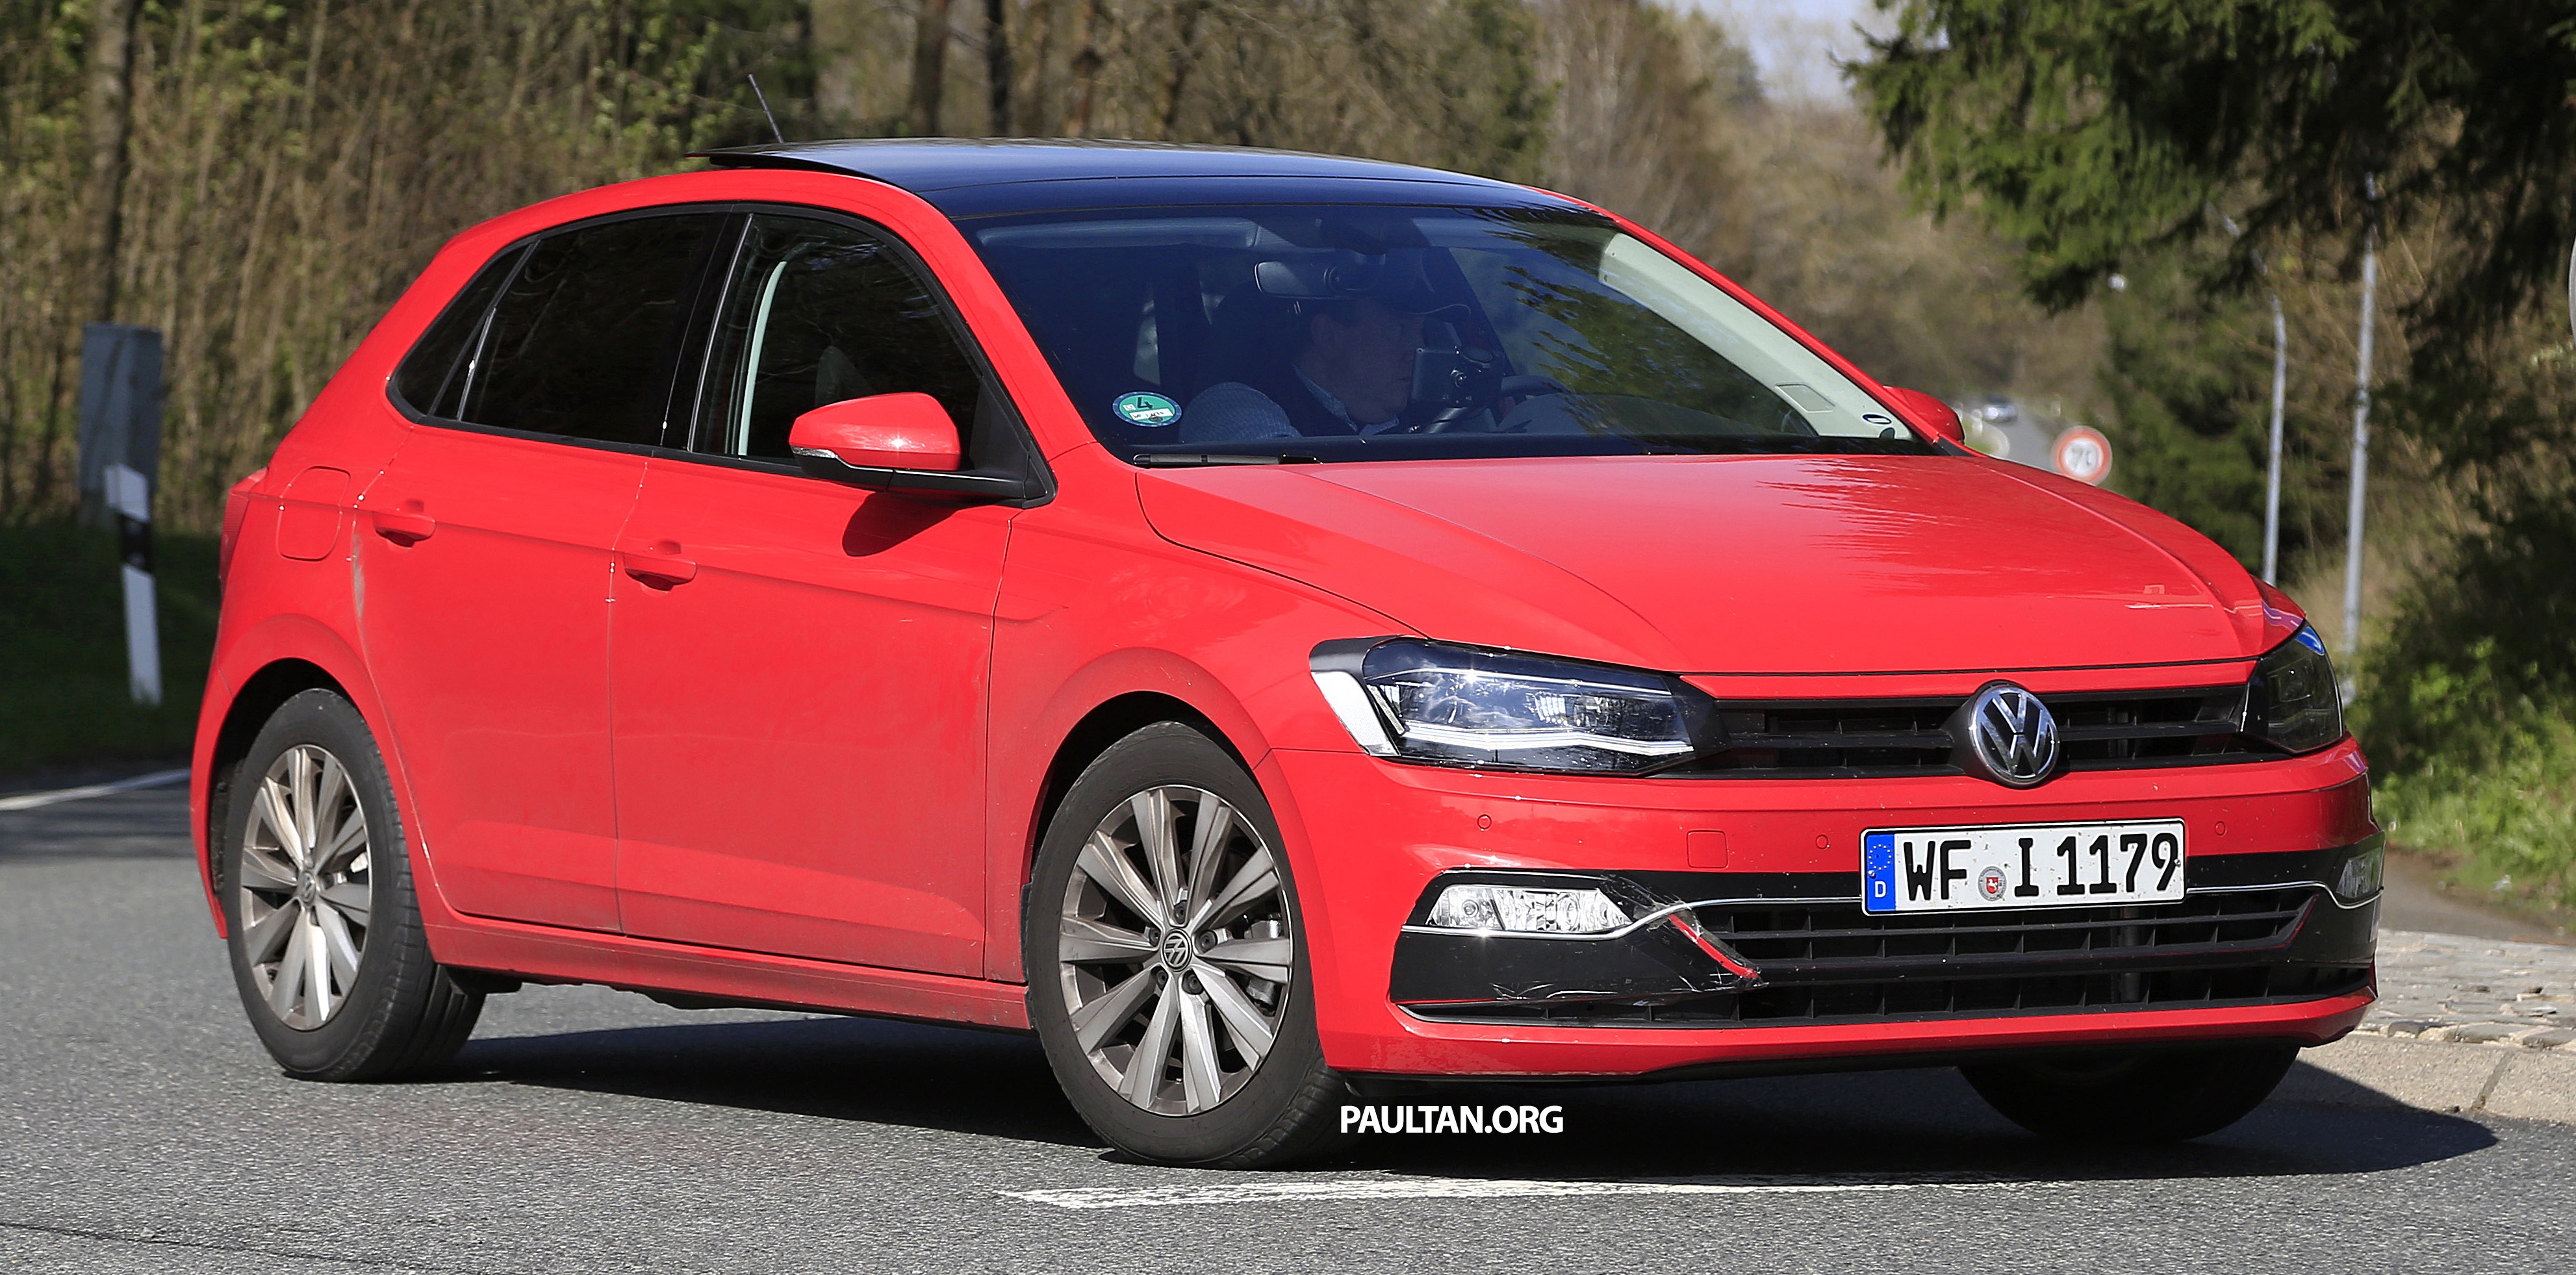 Volkswagen Polo 1.0 2017 review | Autocar